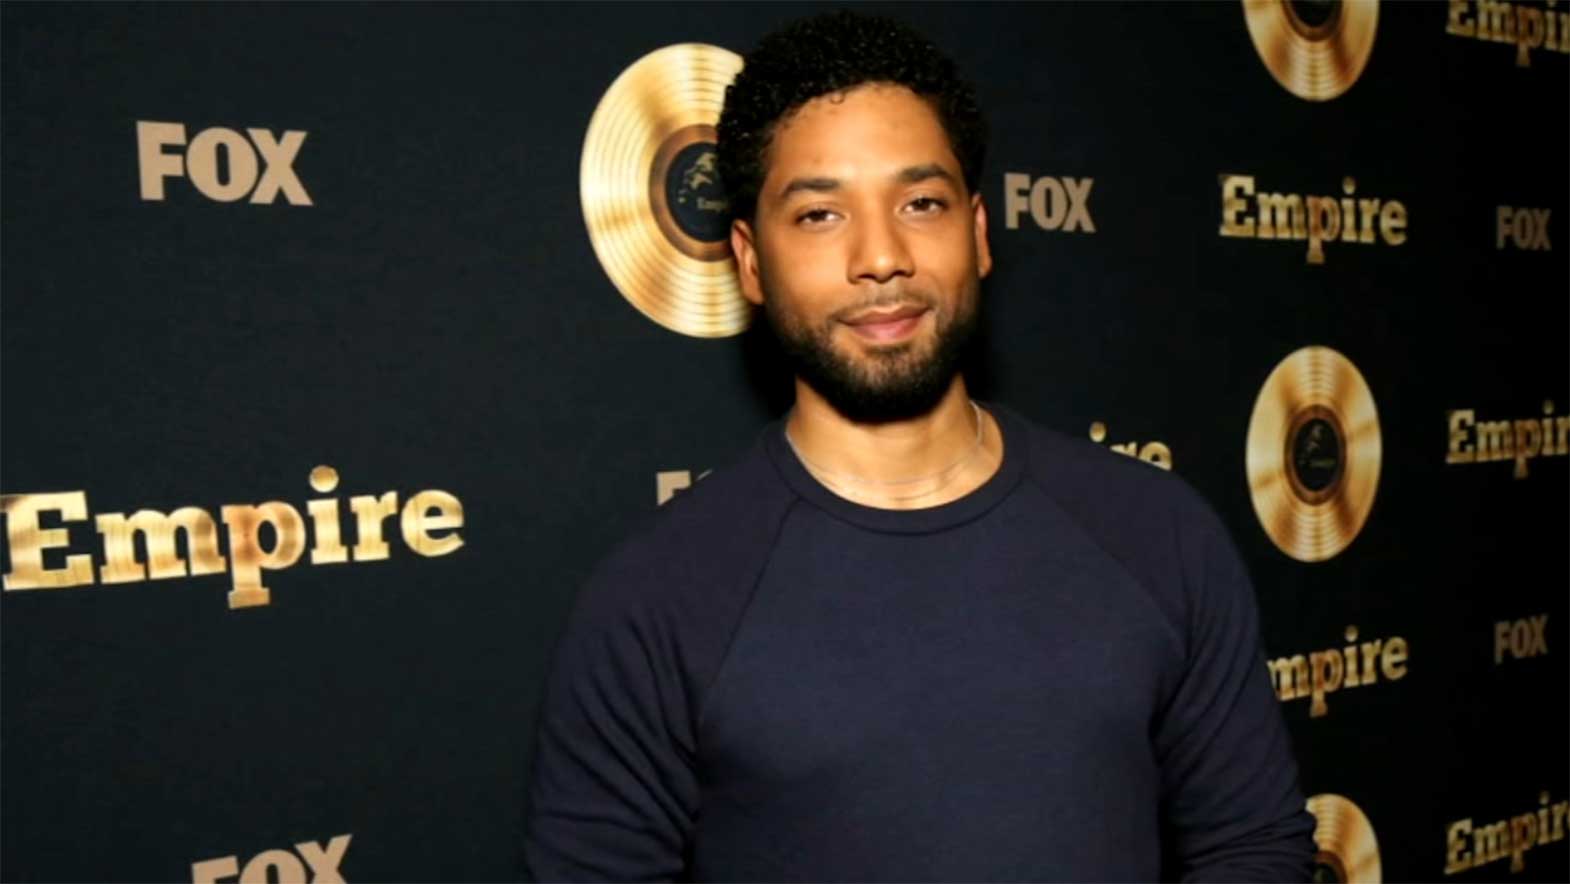 Police Slam US Actor Jussie Smollett, Say He Staged Racist Attack to Boost Career1570 x 884